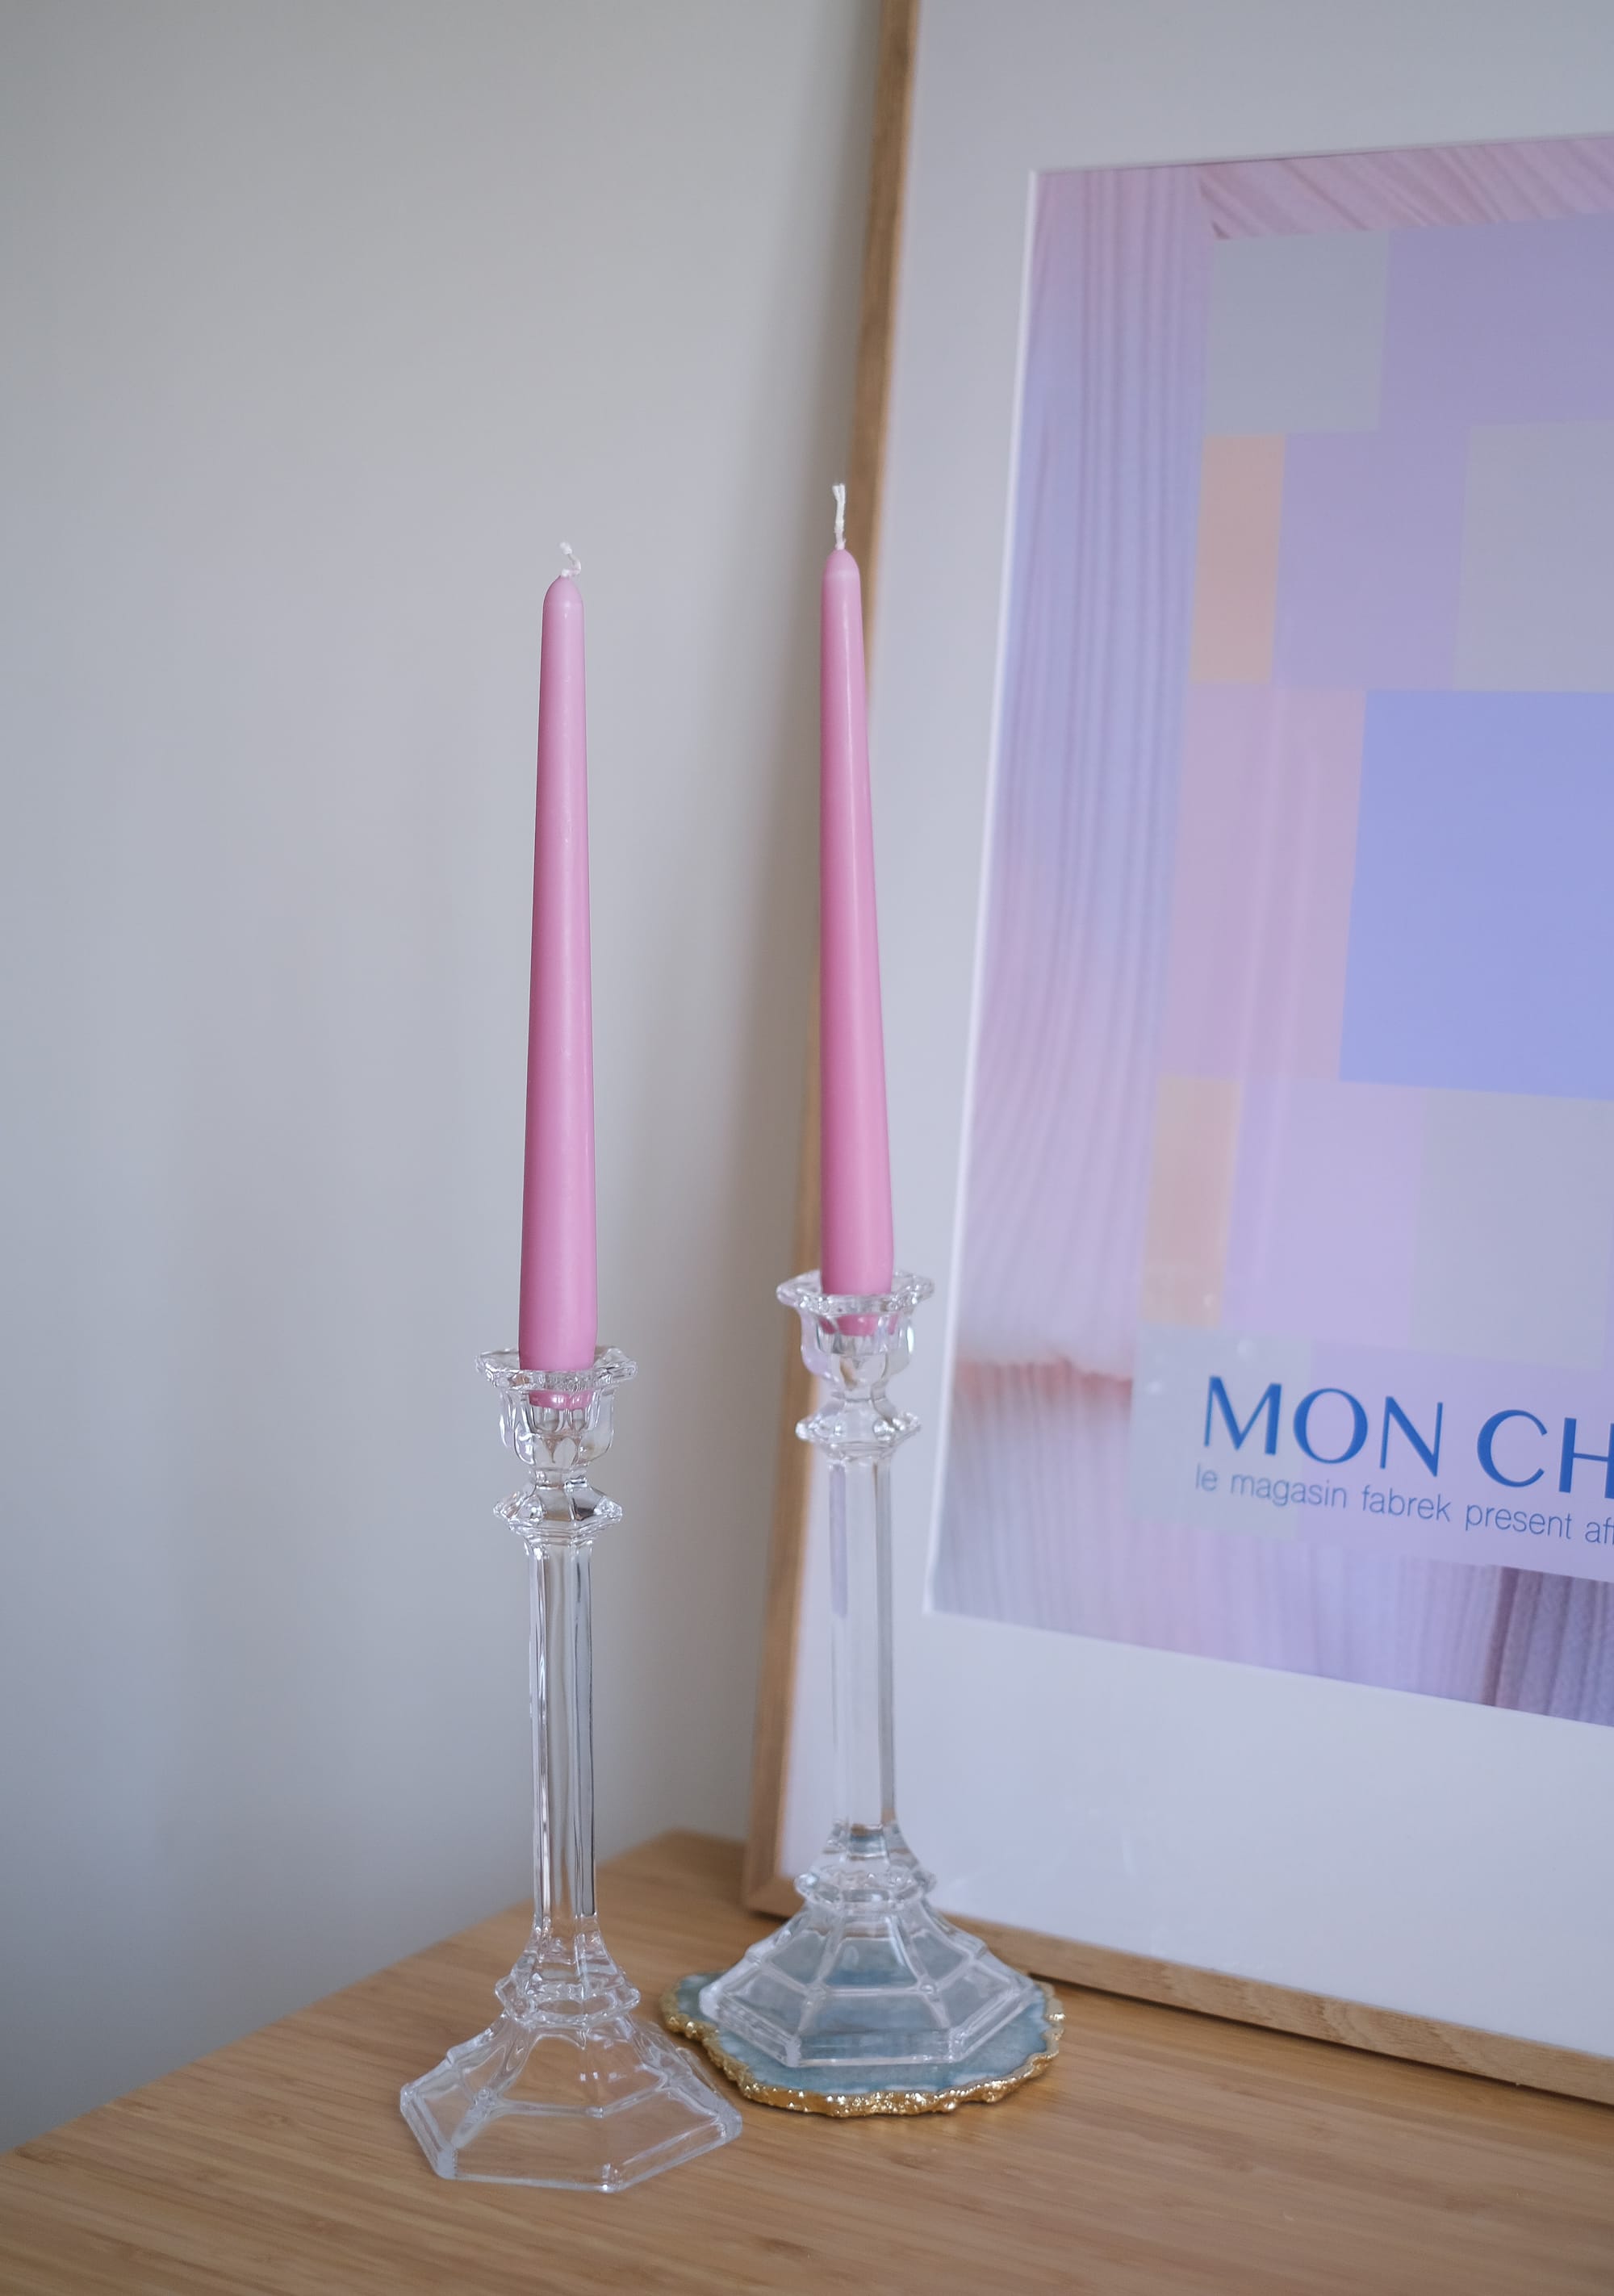 2 pink candles in candle holders